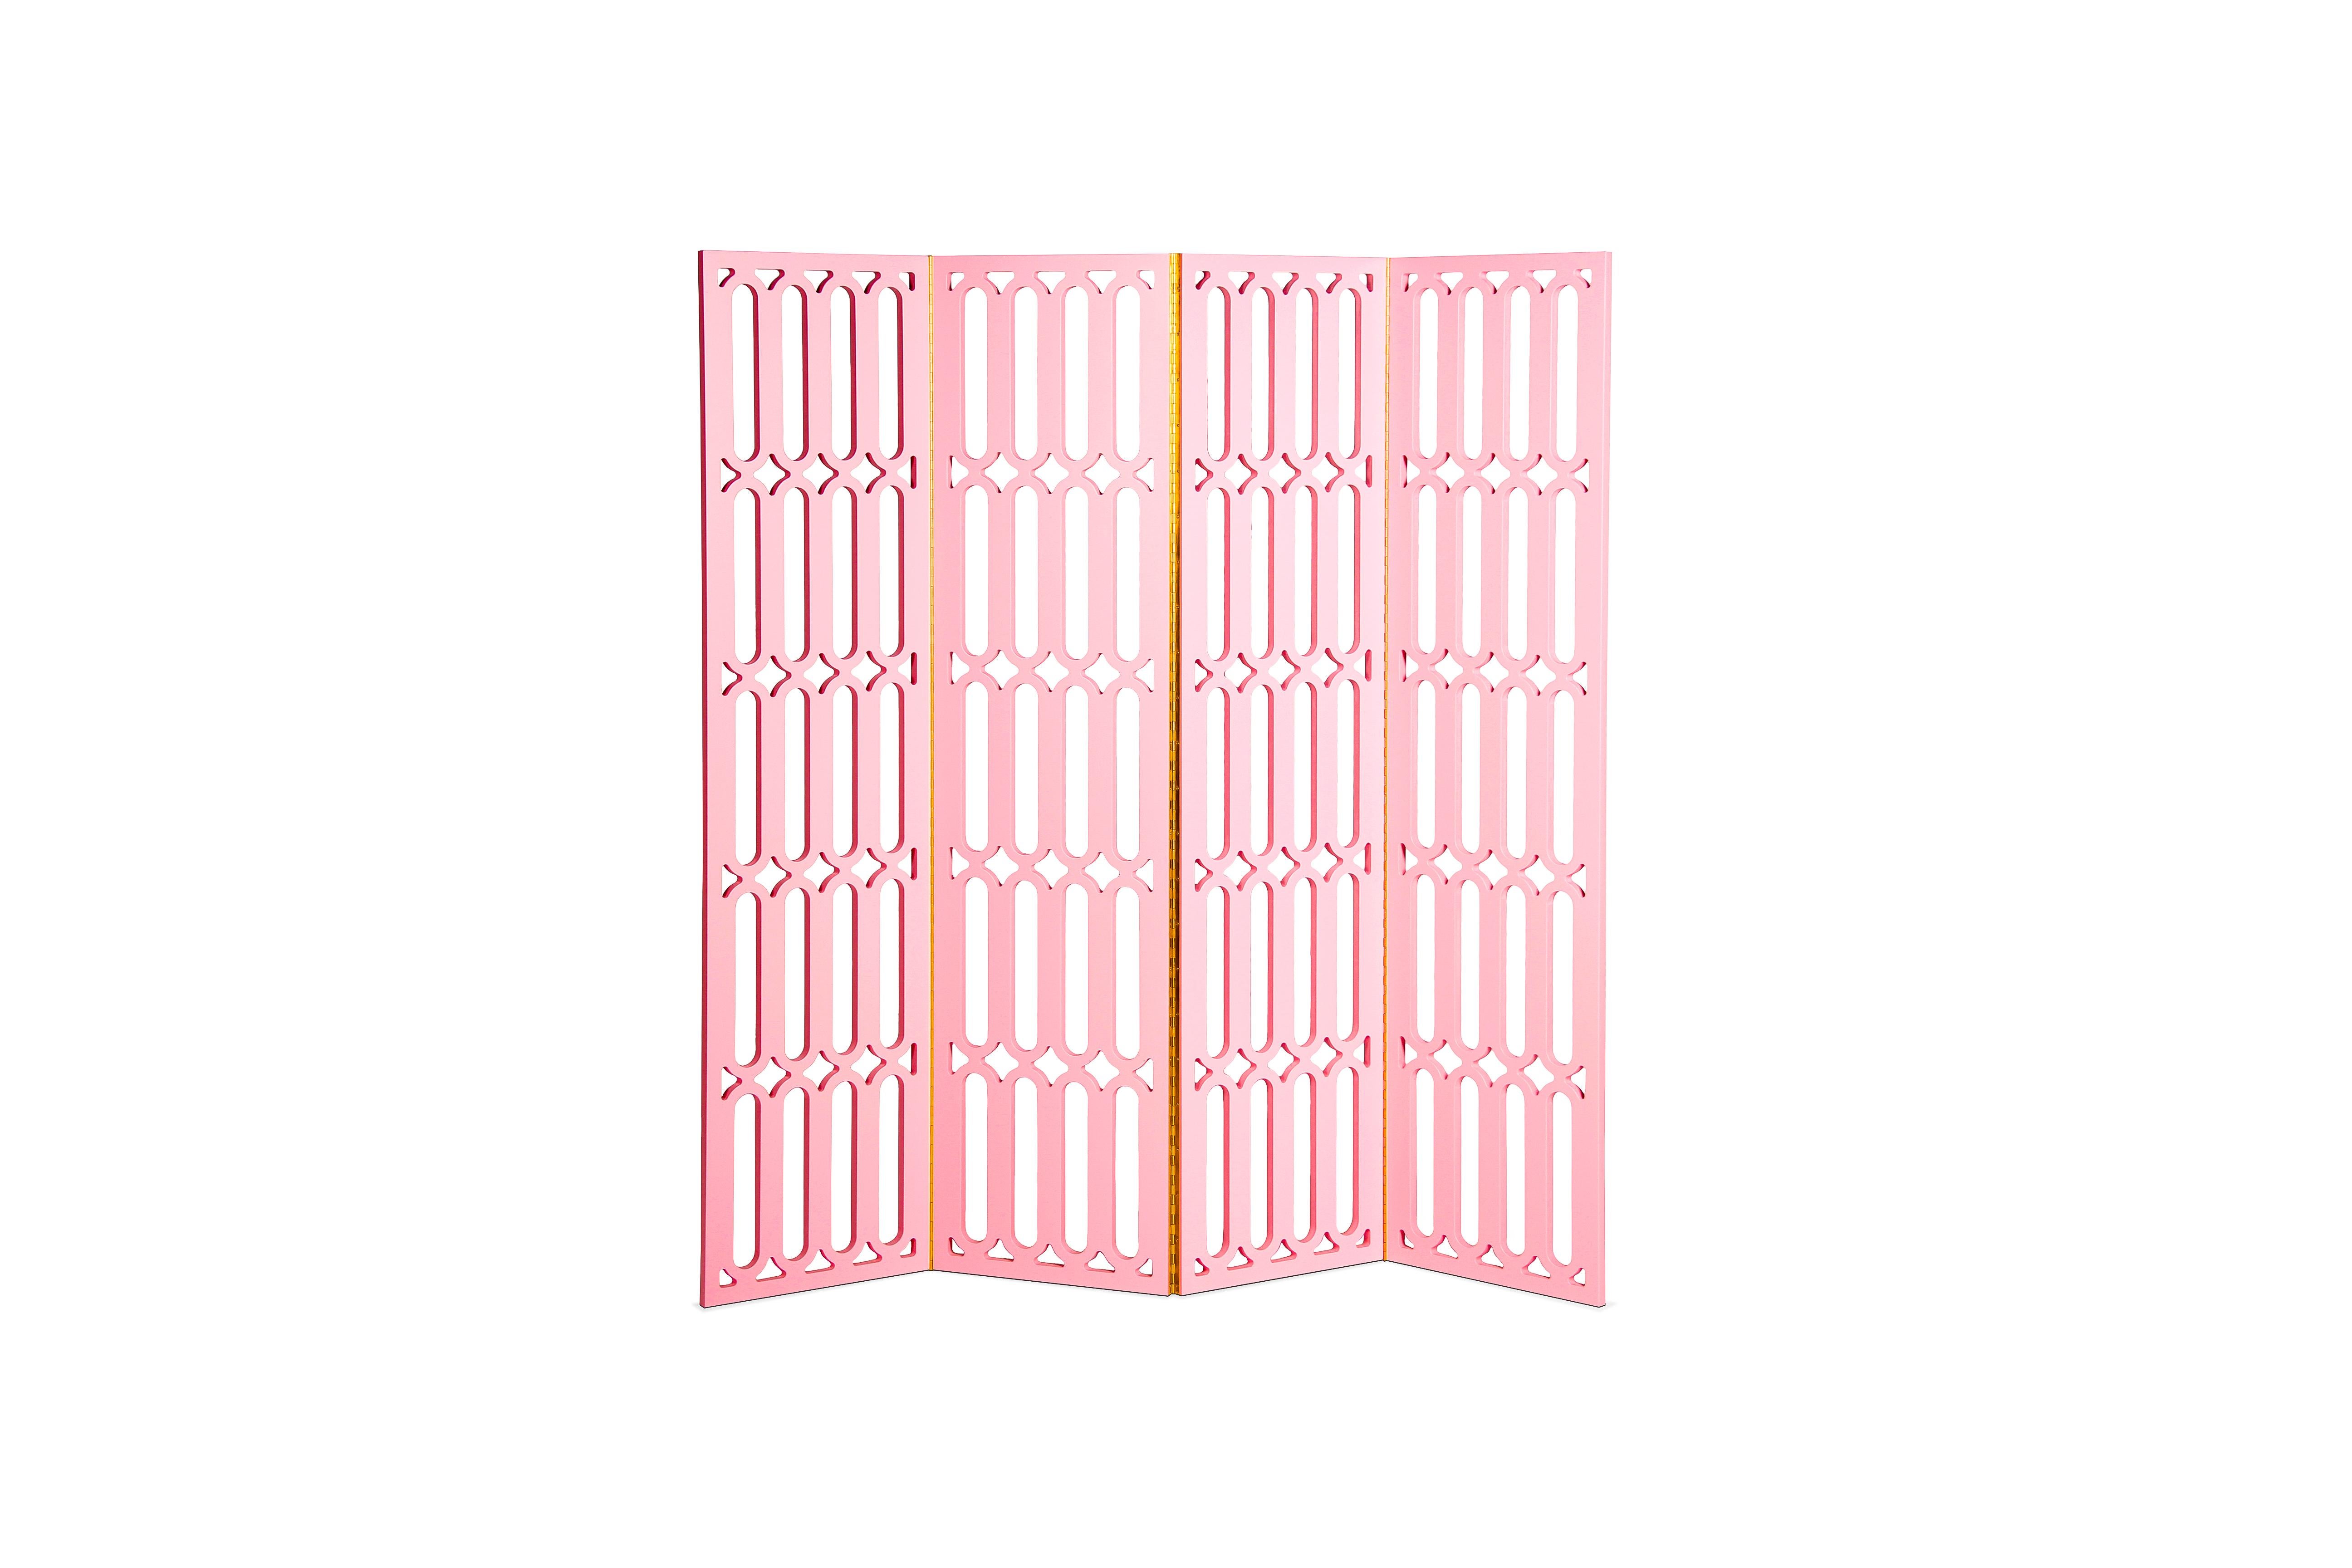 Marshmallow folding screen by Royal Stranger.
Dimensions: 165 x 3 x 168 cm.
Materials: Lacquered wood with matte finish. Polished brass.

The Marshmallow folding screen is inspired by the glorious Art Deco decade and the roaring Twenties. With a